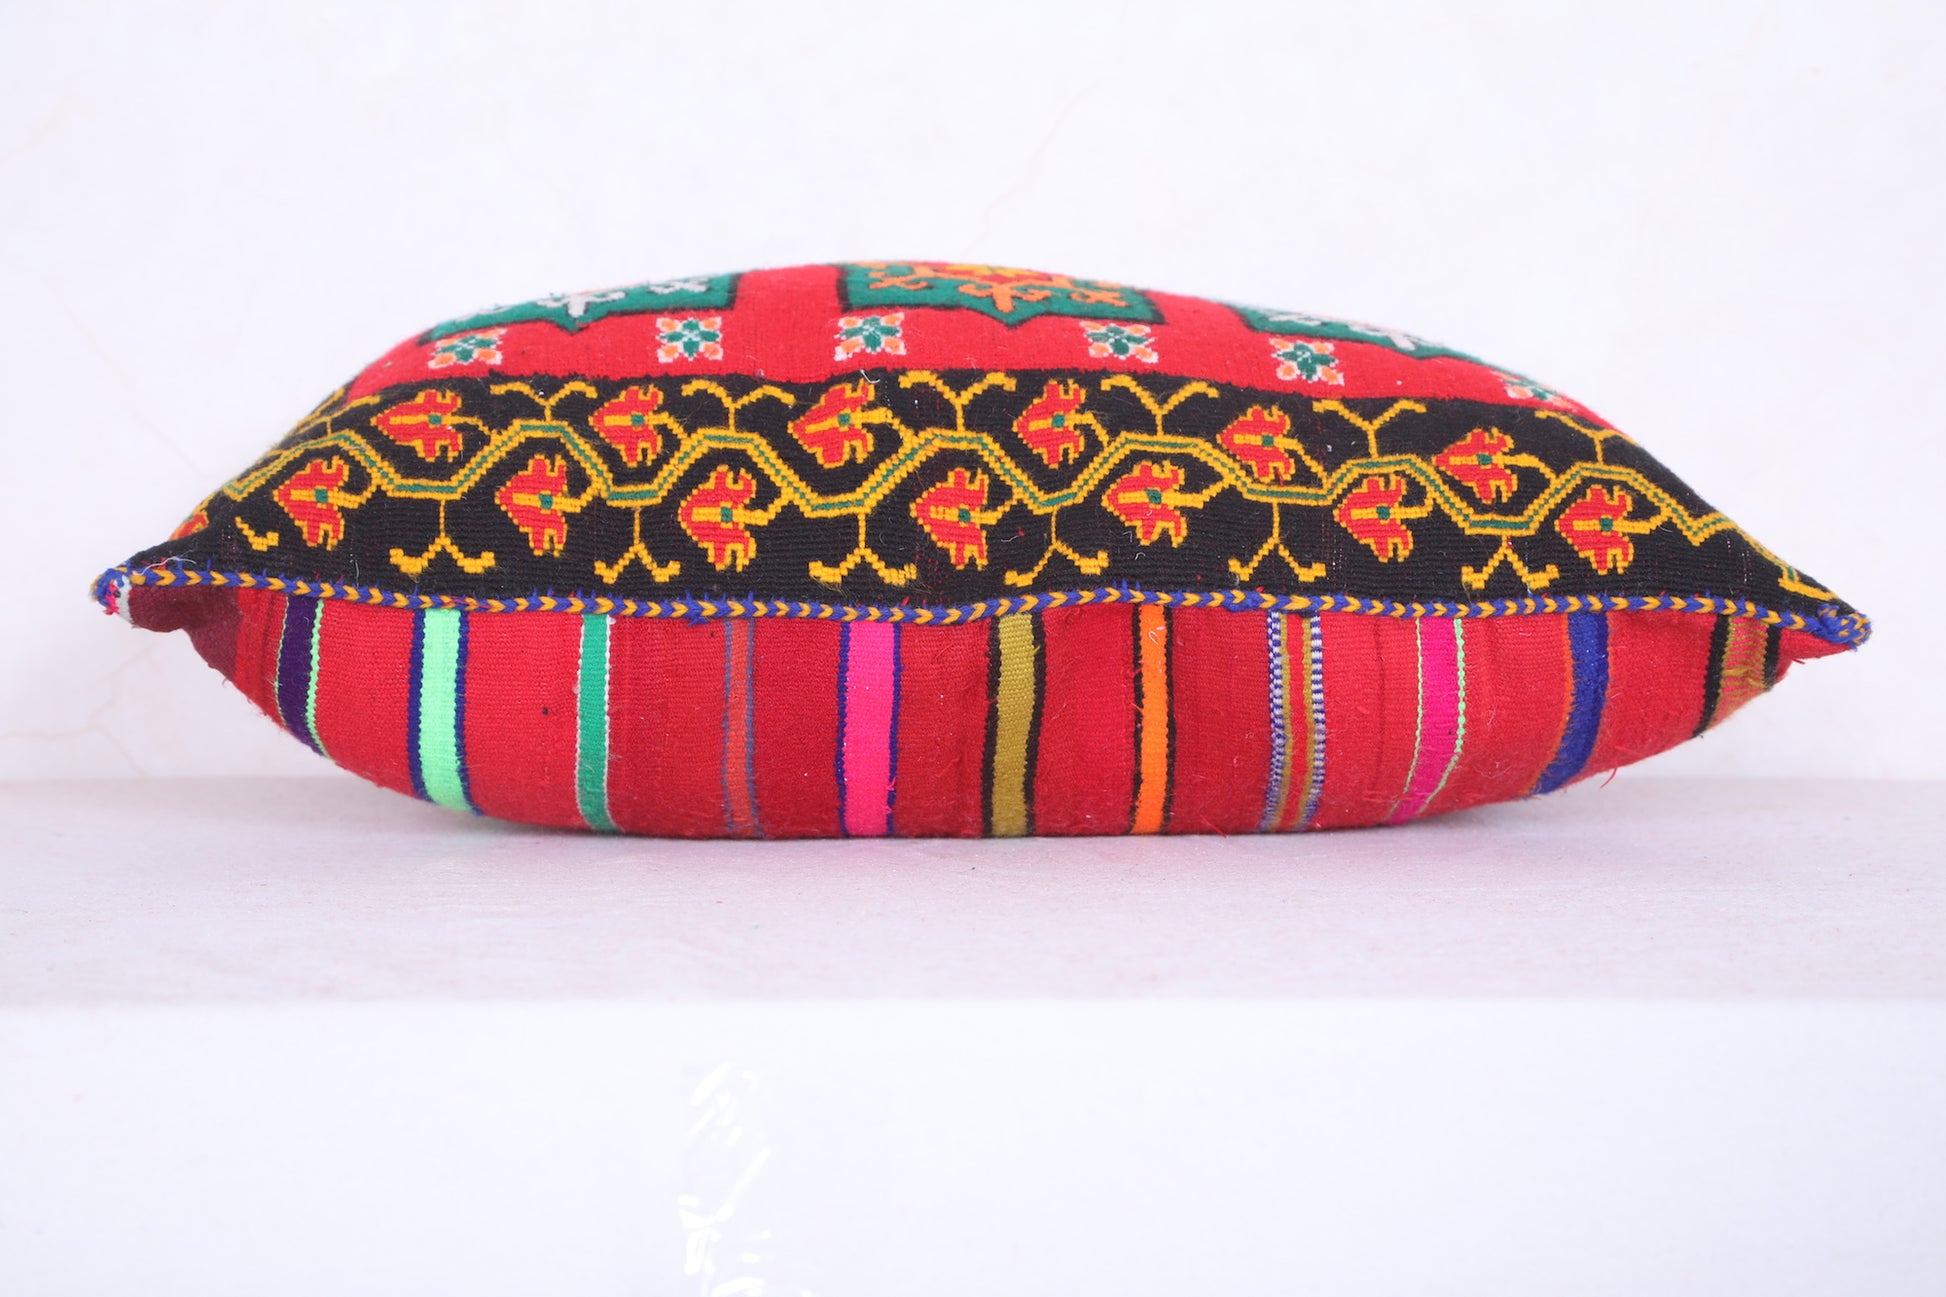 Moroccan handmade kilim pillow  16.5 INCHES X 22.4 INCHES